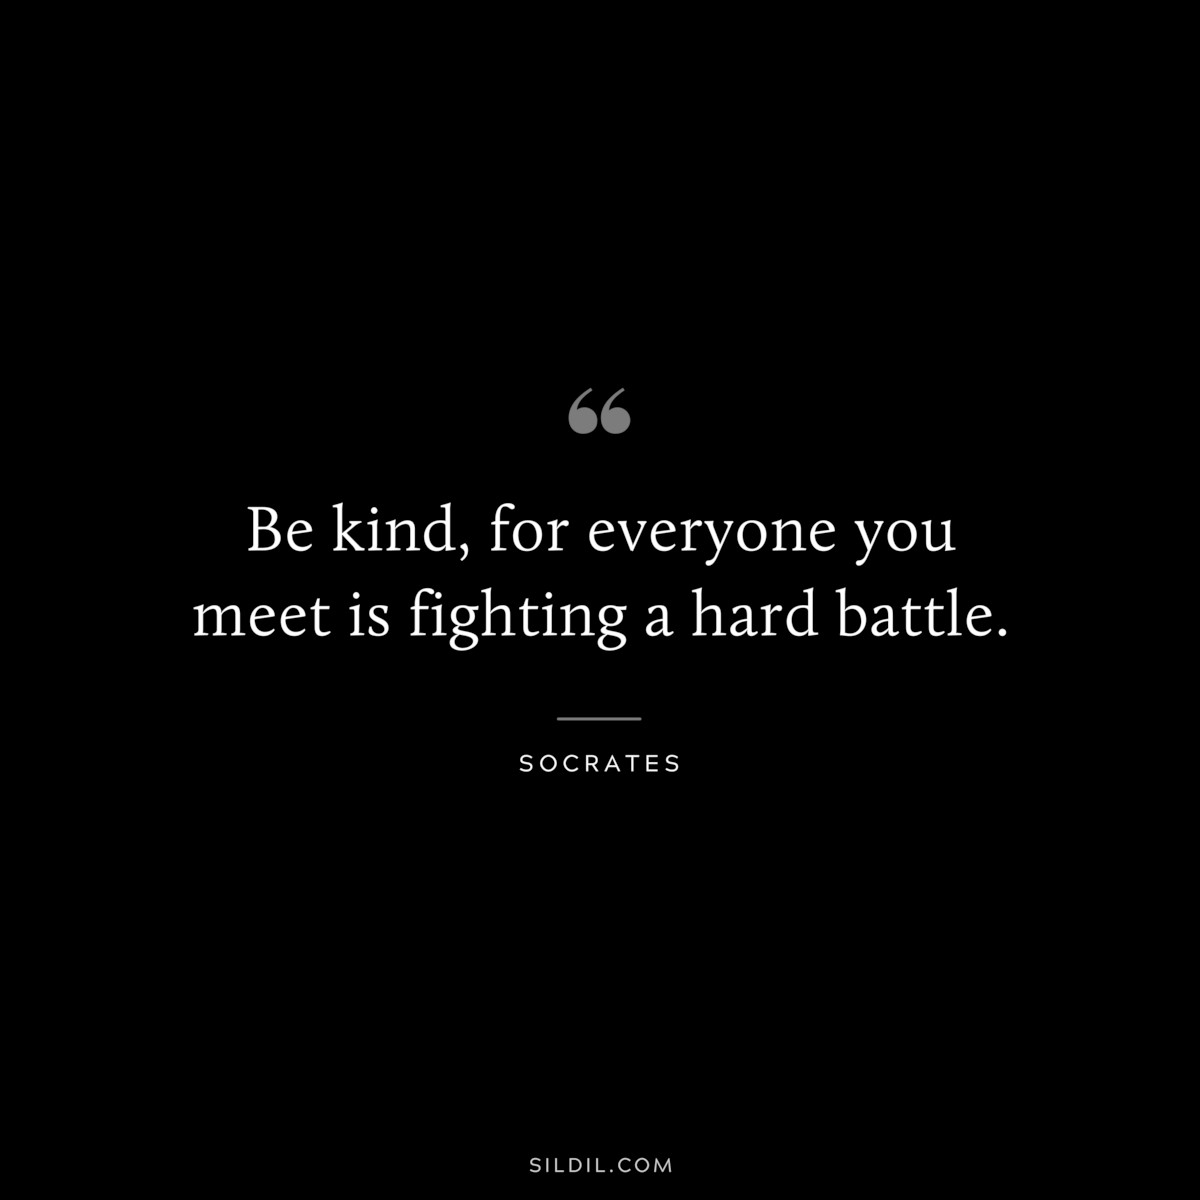 Be kind, for everyone you meet is fighting a hard battle. ― Socrates